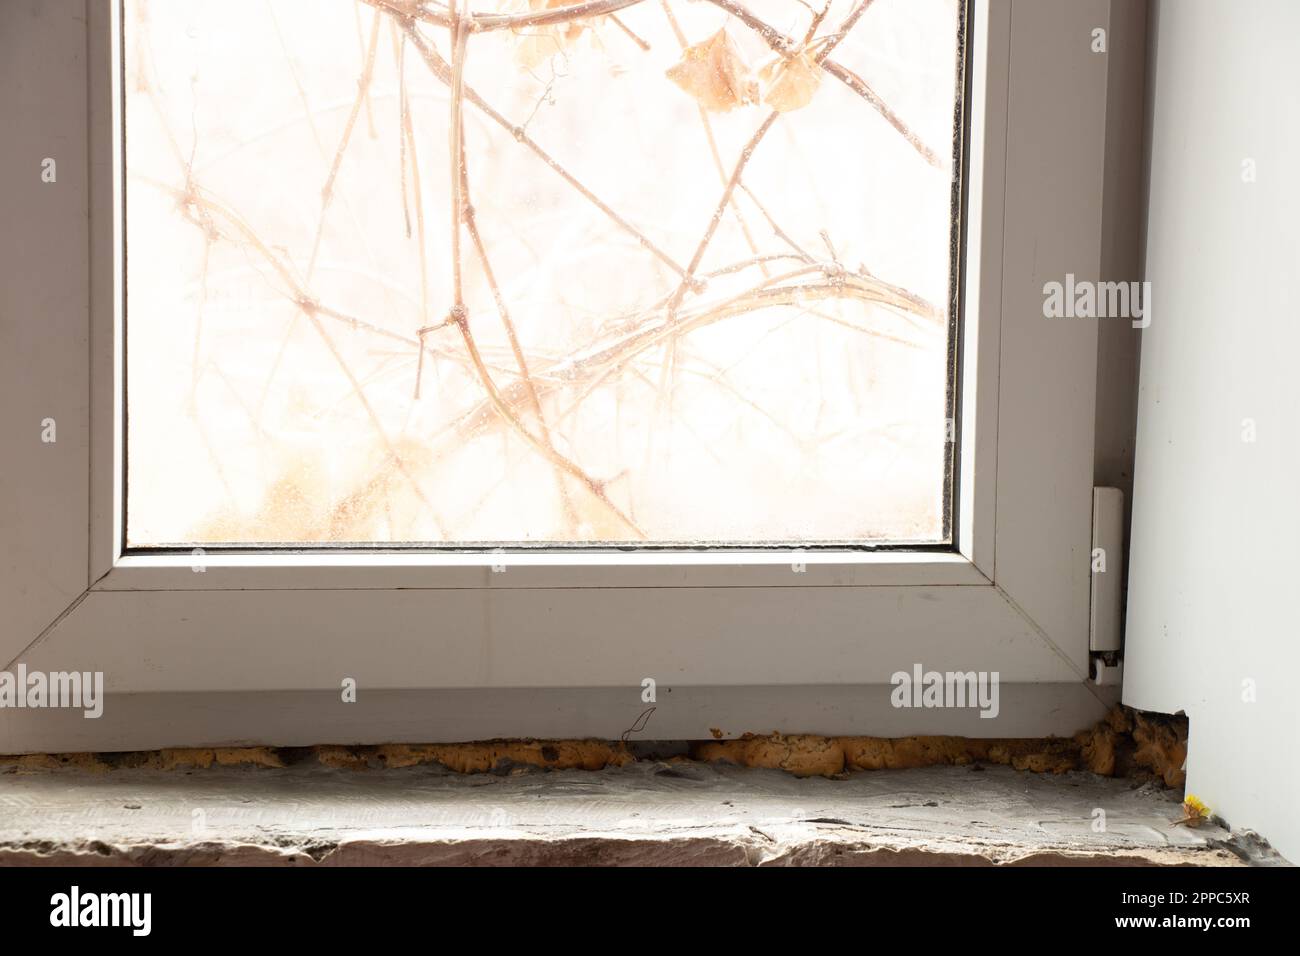 repair of the slope on the window, fungus on the window, window in the apartment Stock Photo